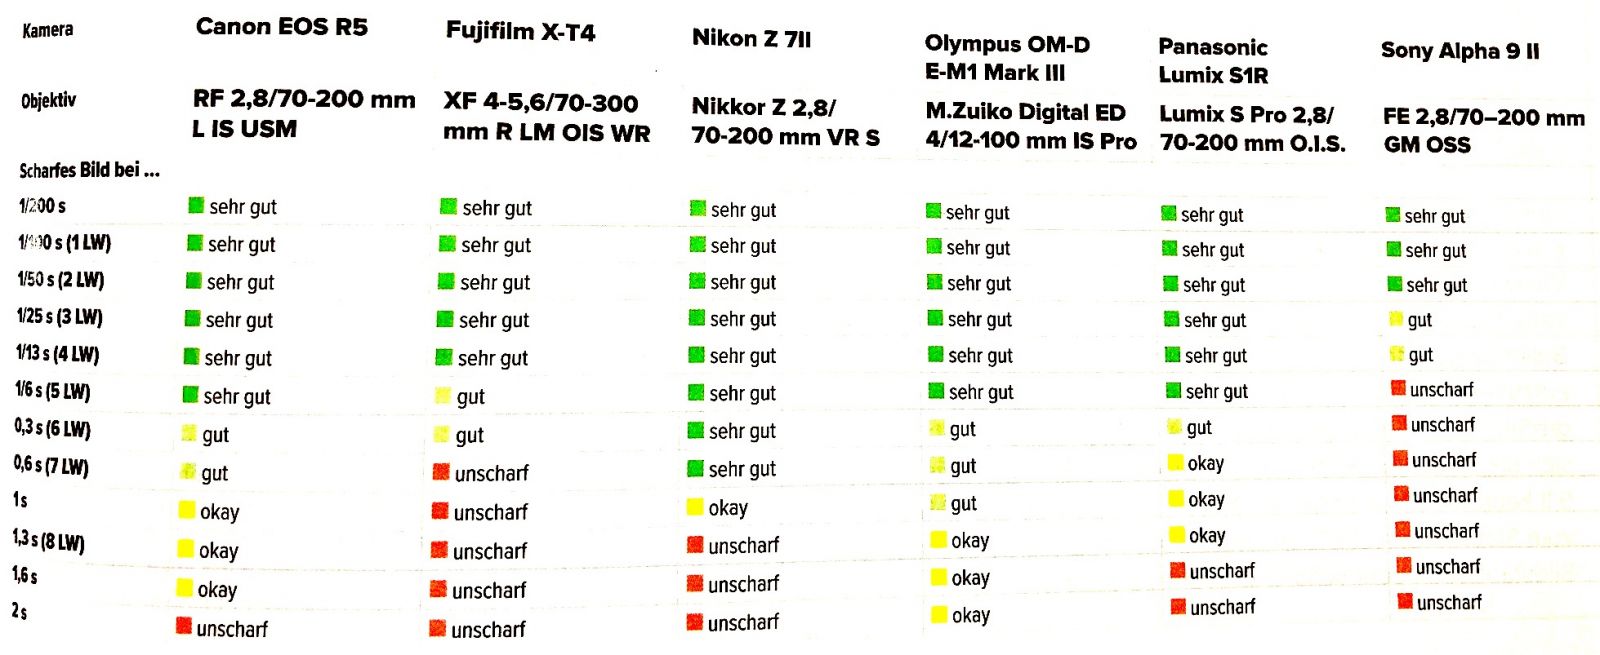 Nikon-Z7II-IBIS-compared-with-other-cameras-2.jpeg